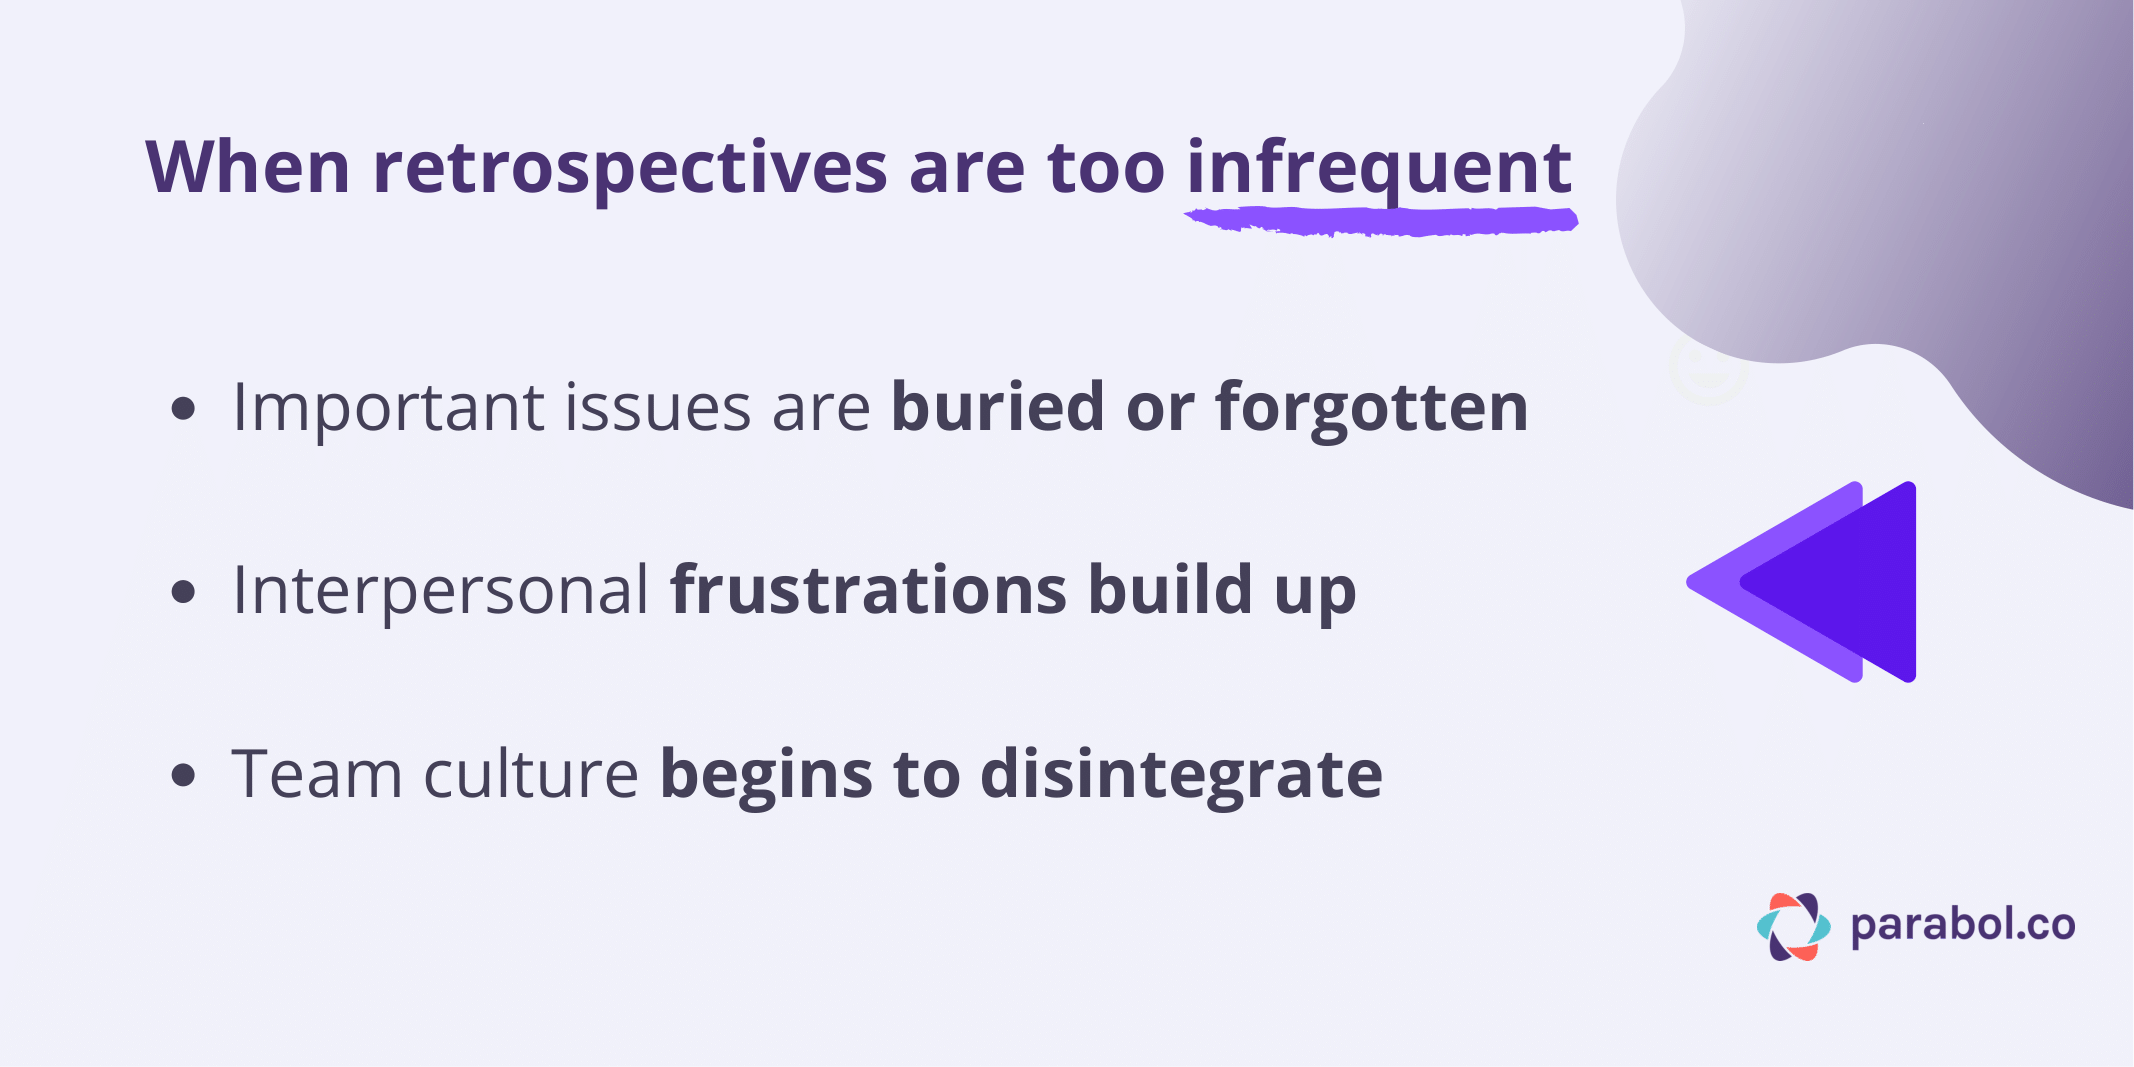 When retrospectives are too infrequent important issues are buried or forgotten, interpersonal frustrations build up and team culture begins to disintegrate